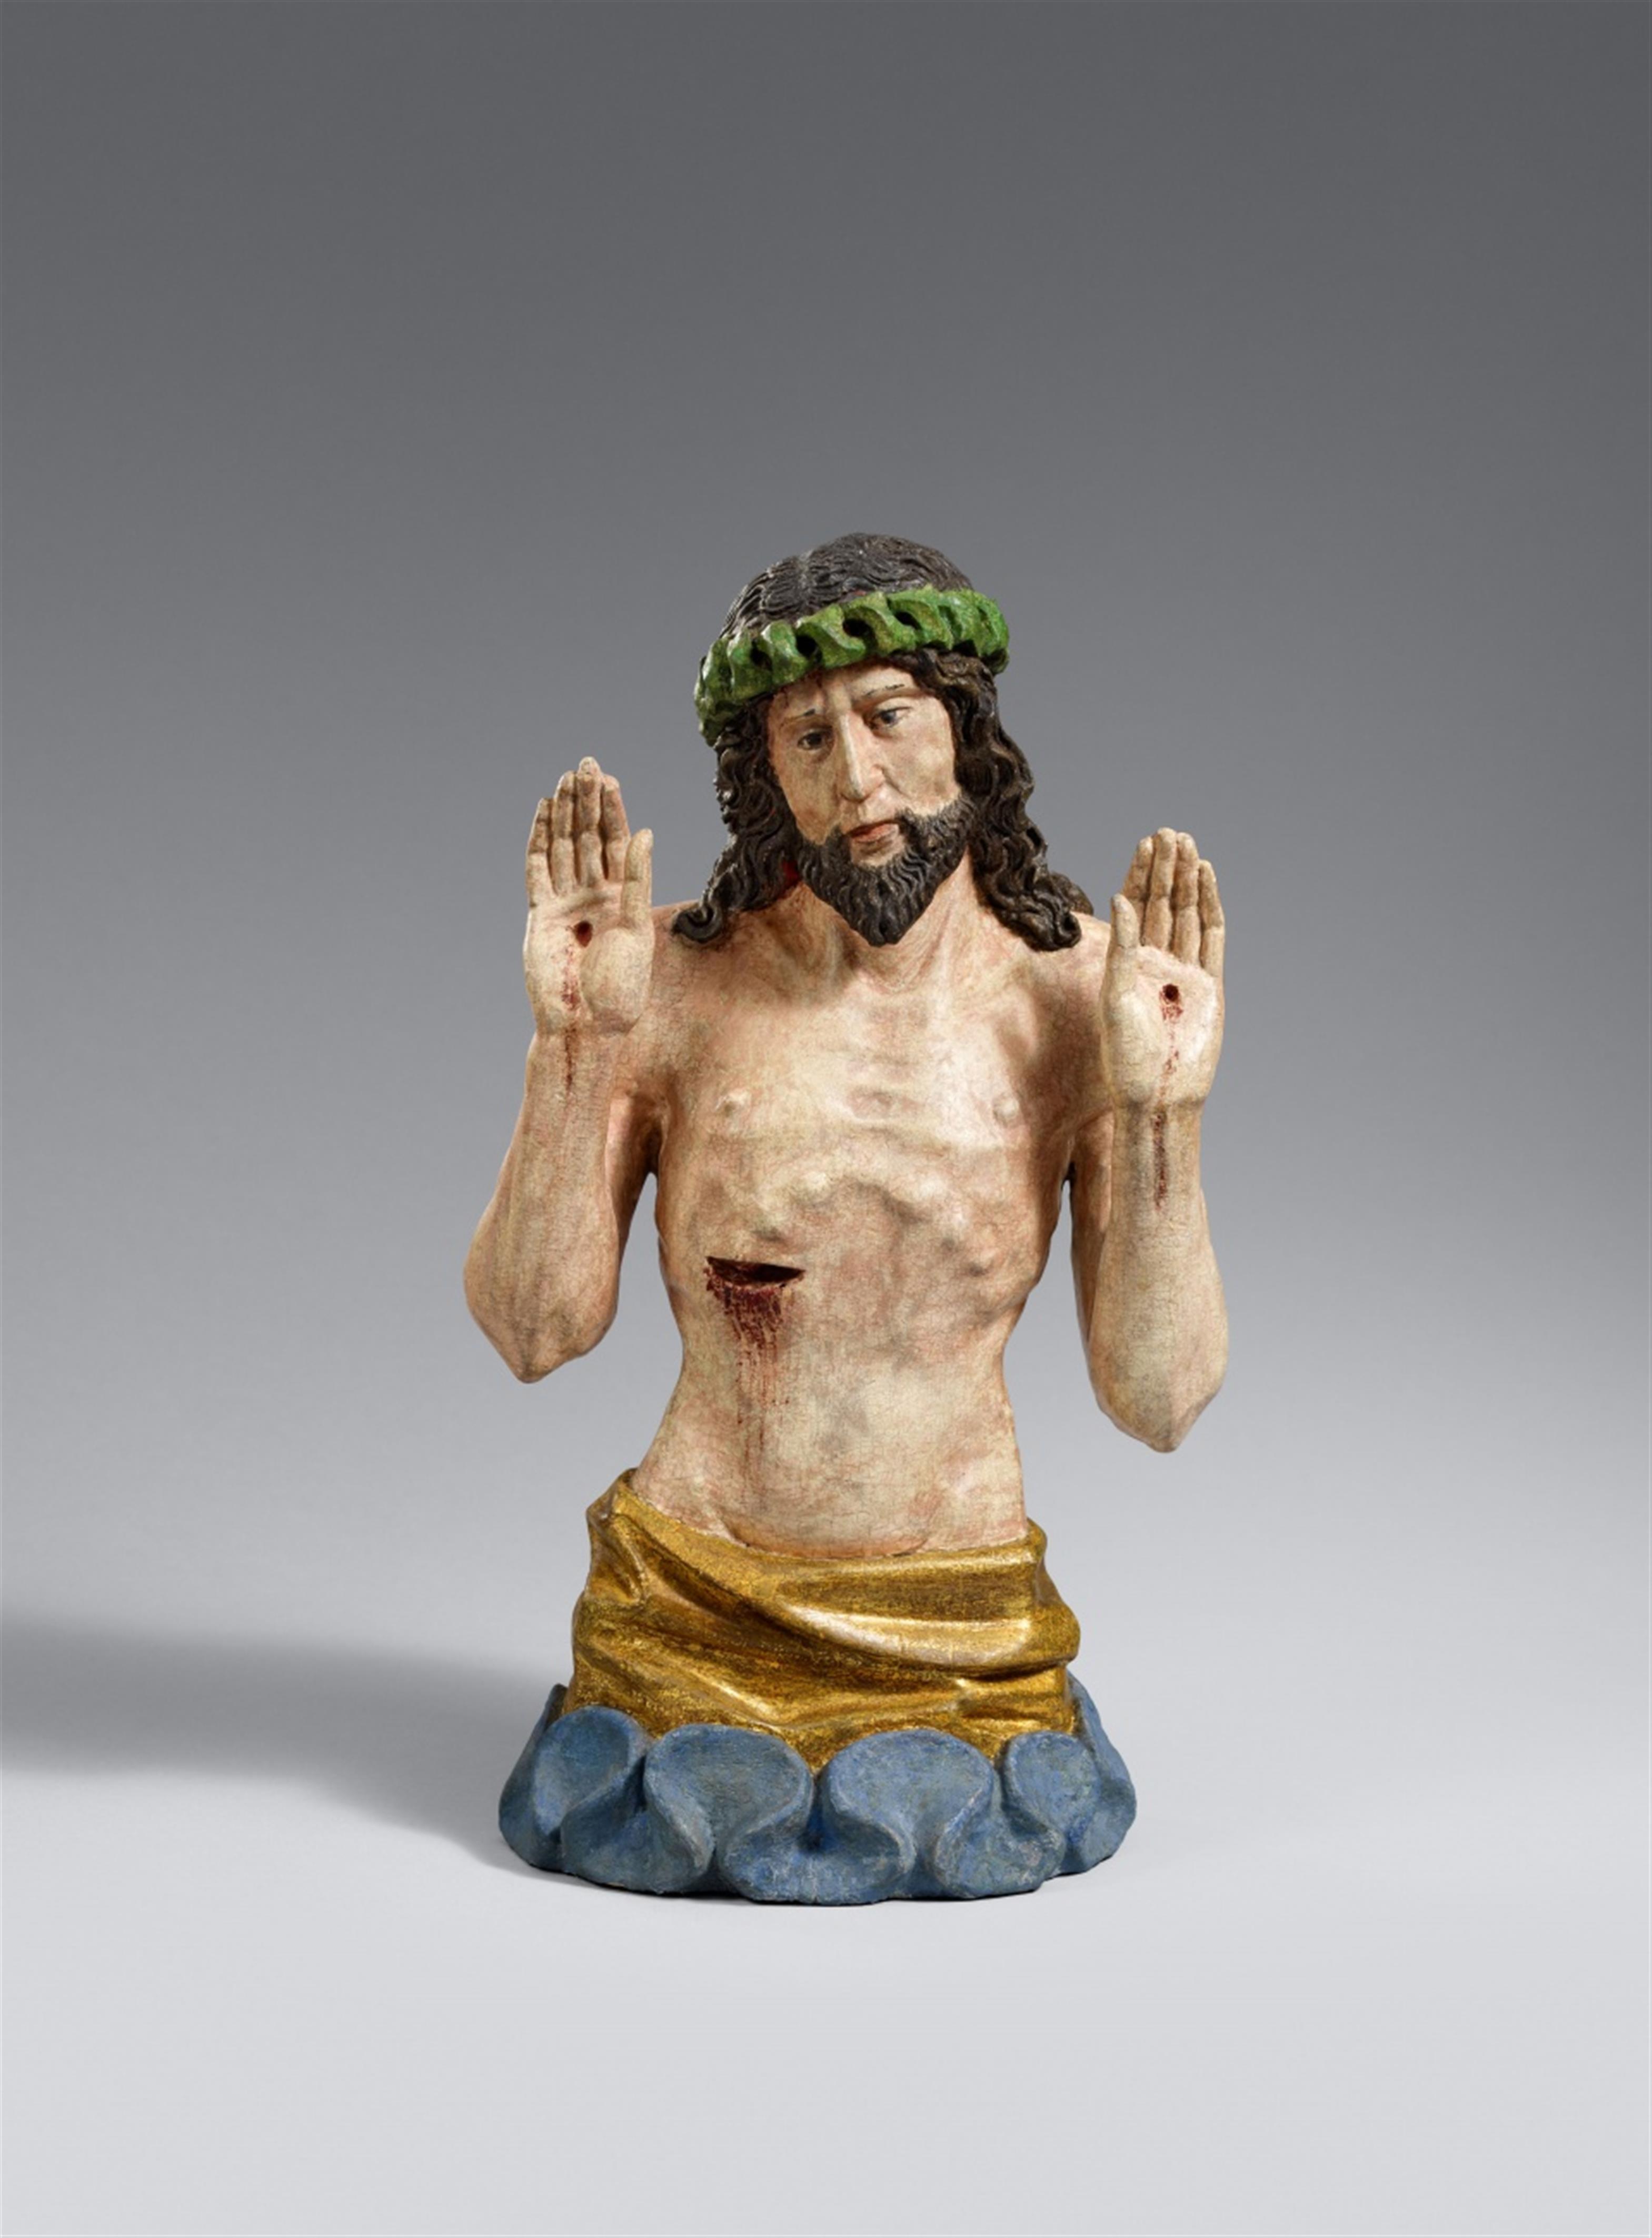 Ulm circa 1460 - An Ulm carved wooden figure of Christ as the Man of Sorrows, circa 1460. - image-1